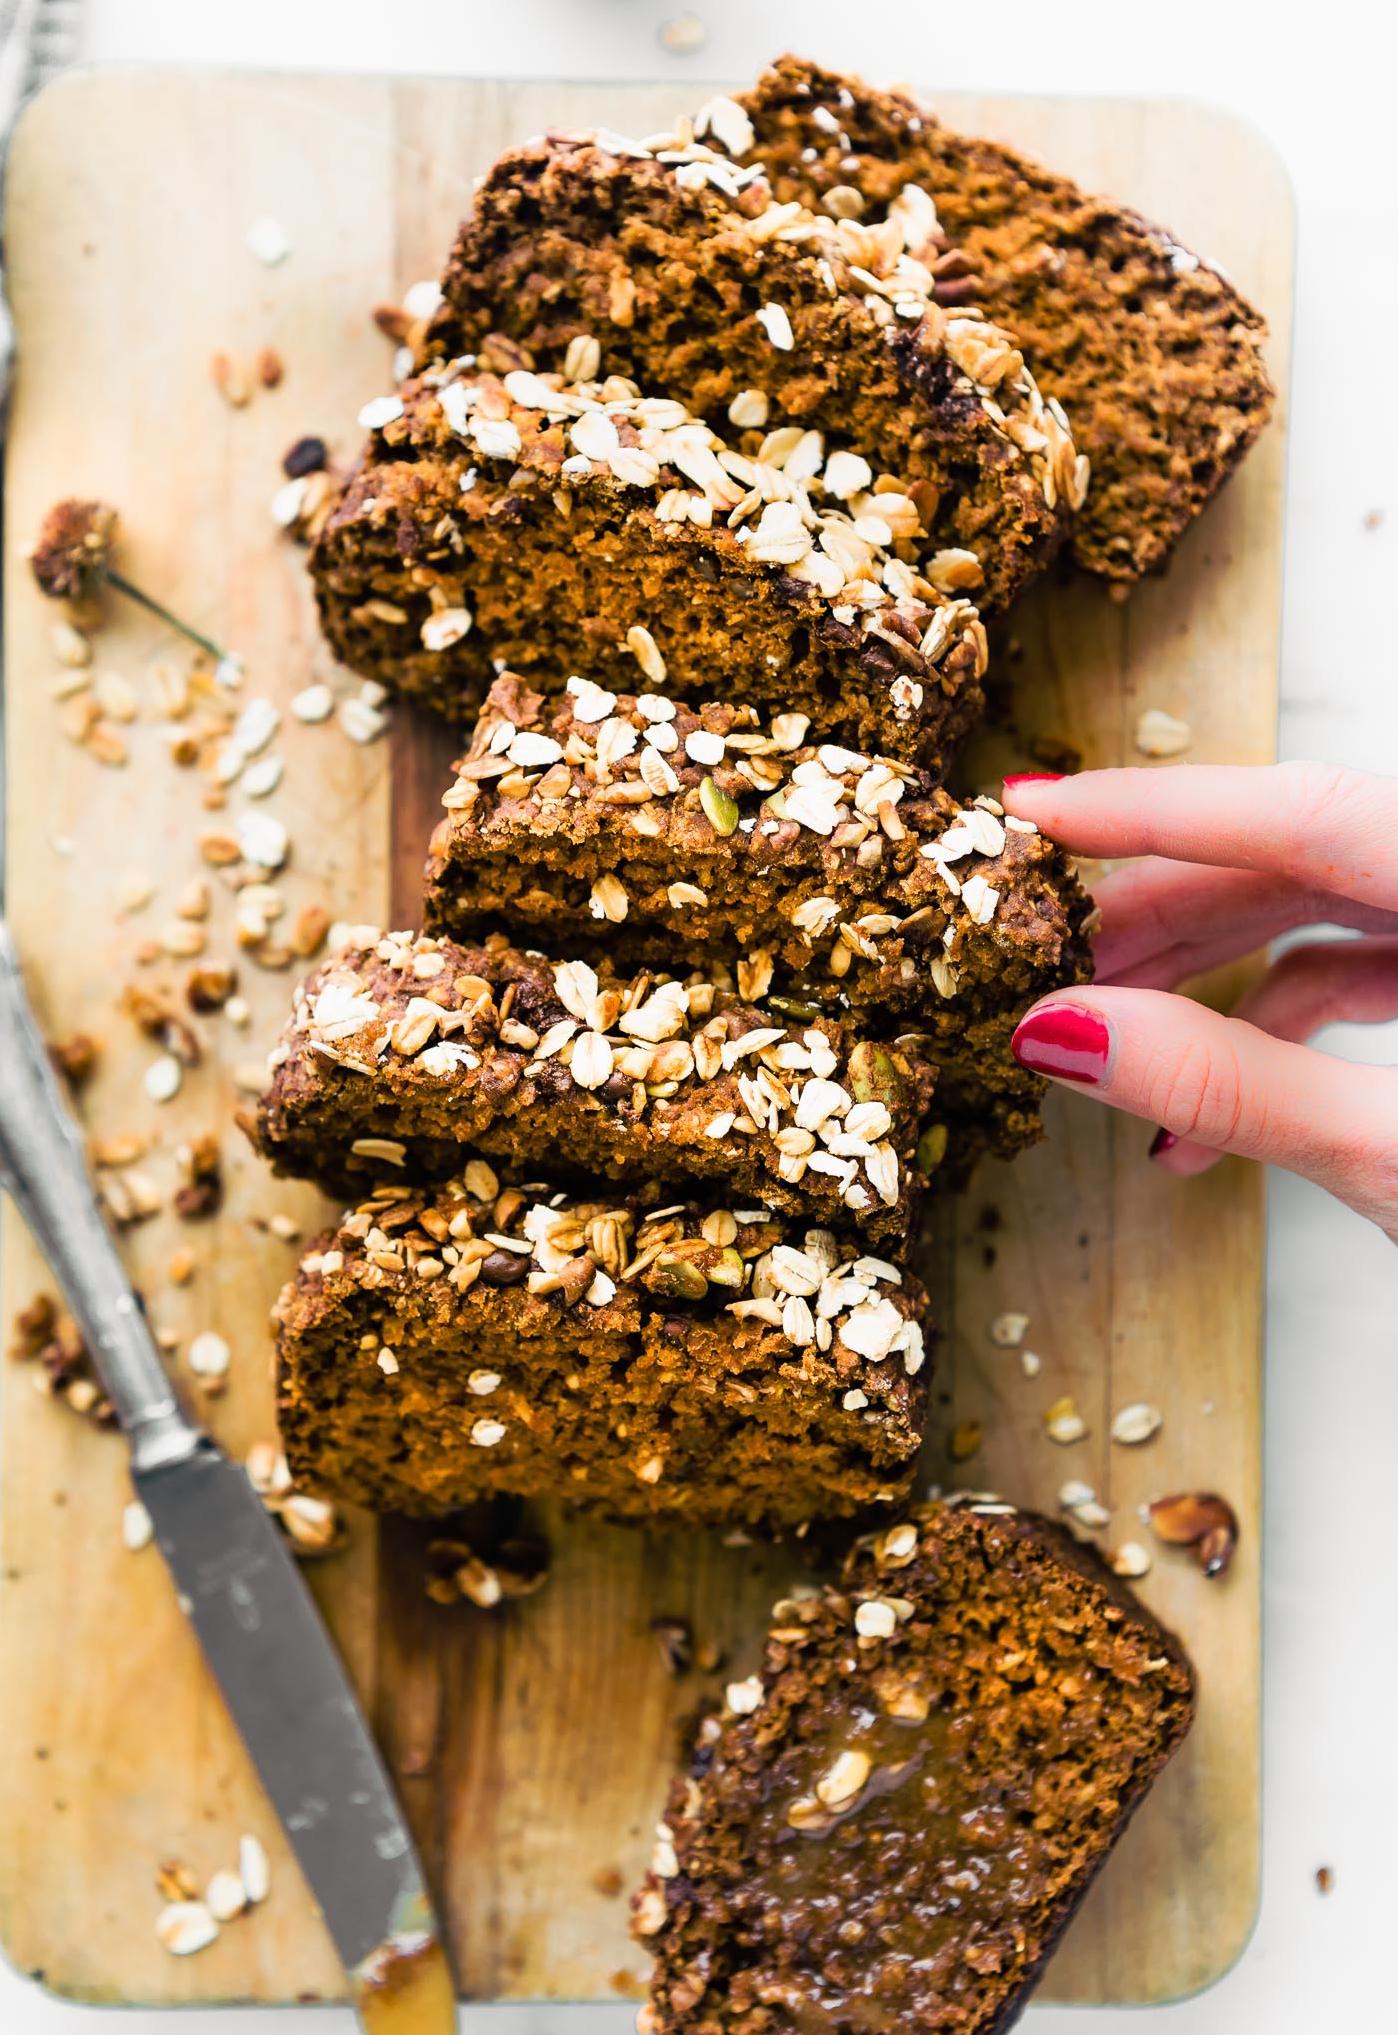  Who said gluten-free baking had to be boring? This bread is anything but!